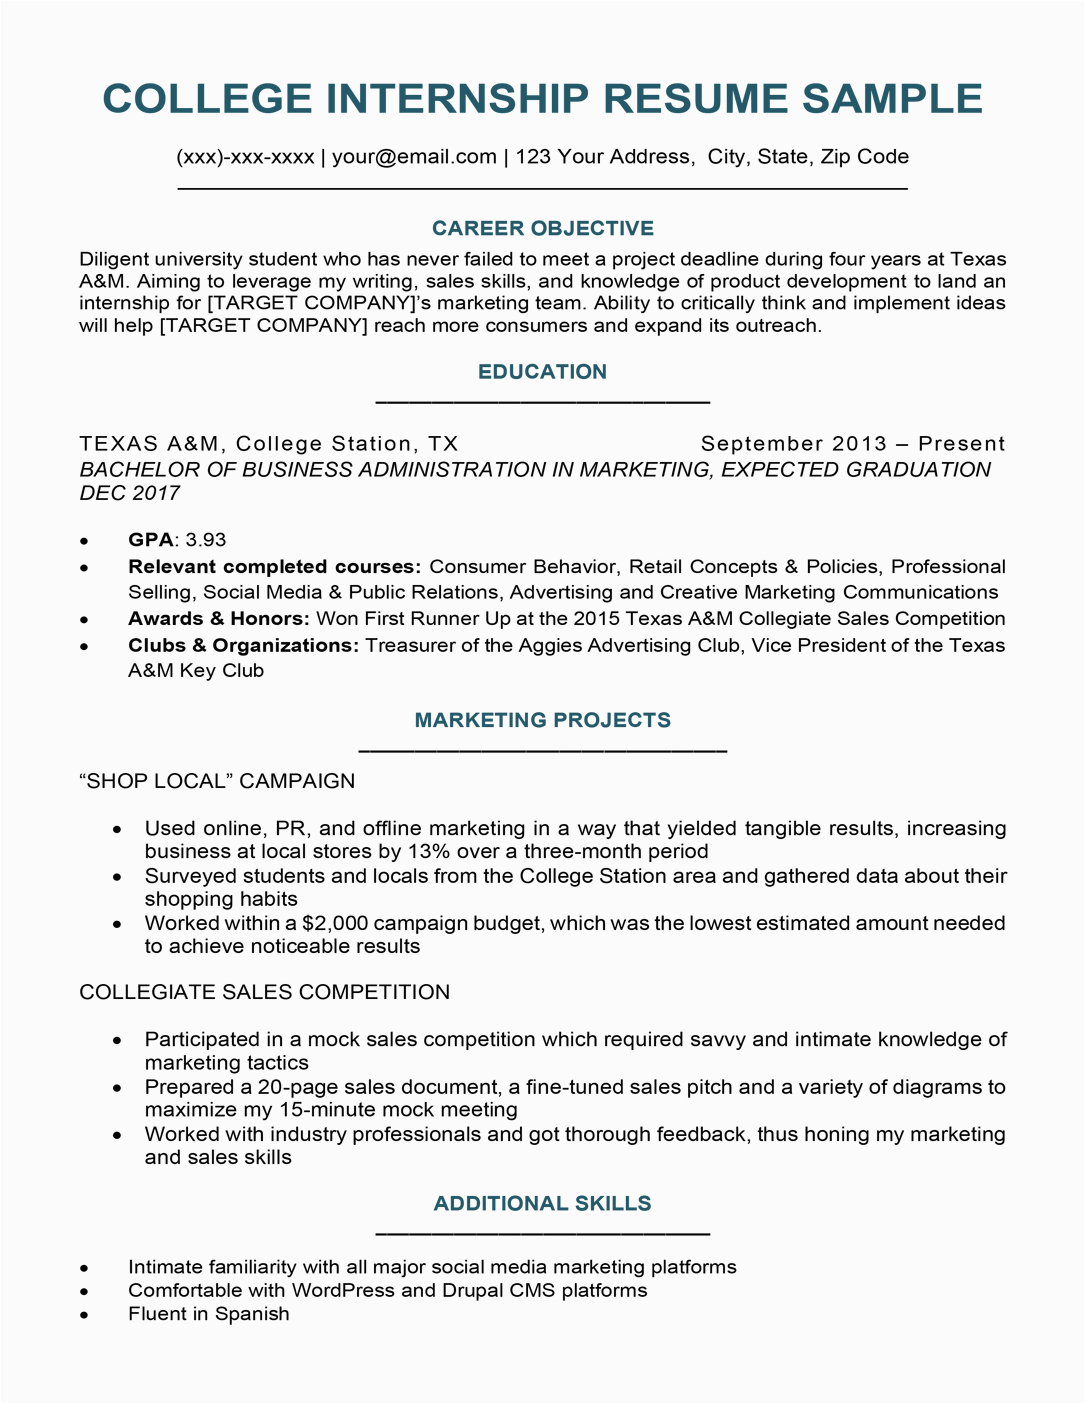 Good Resume Sample for College Student College Student Resume Sample & Writing Tips